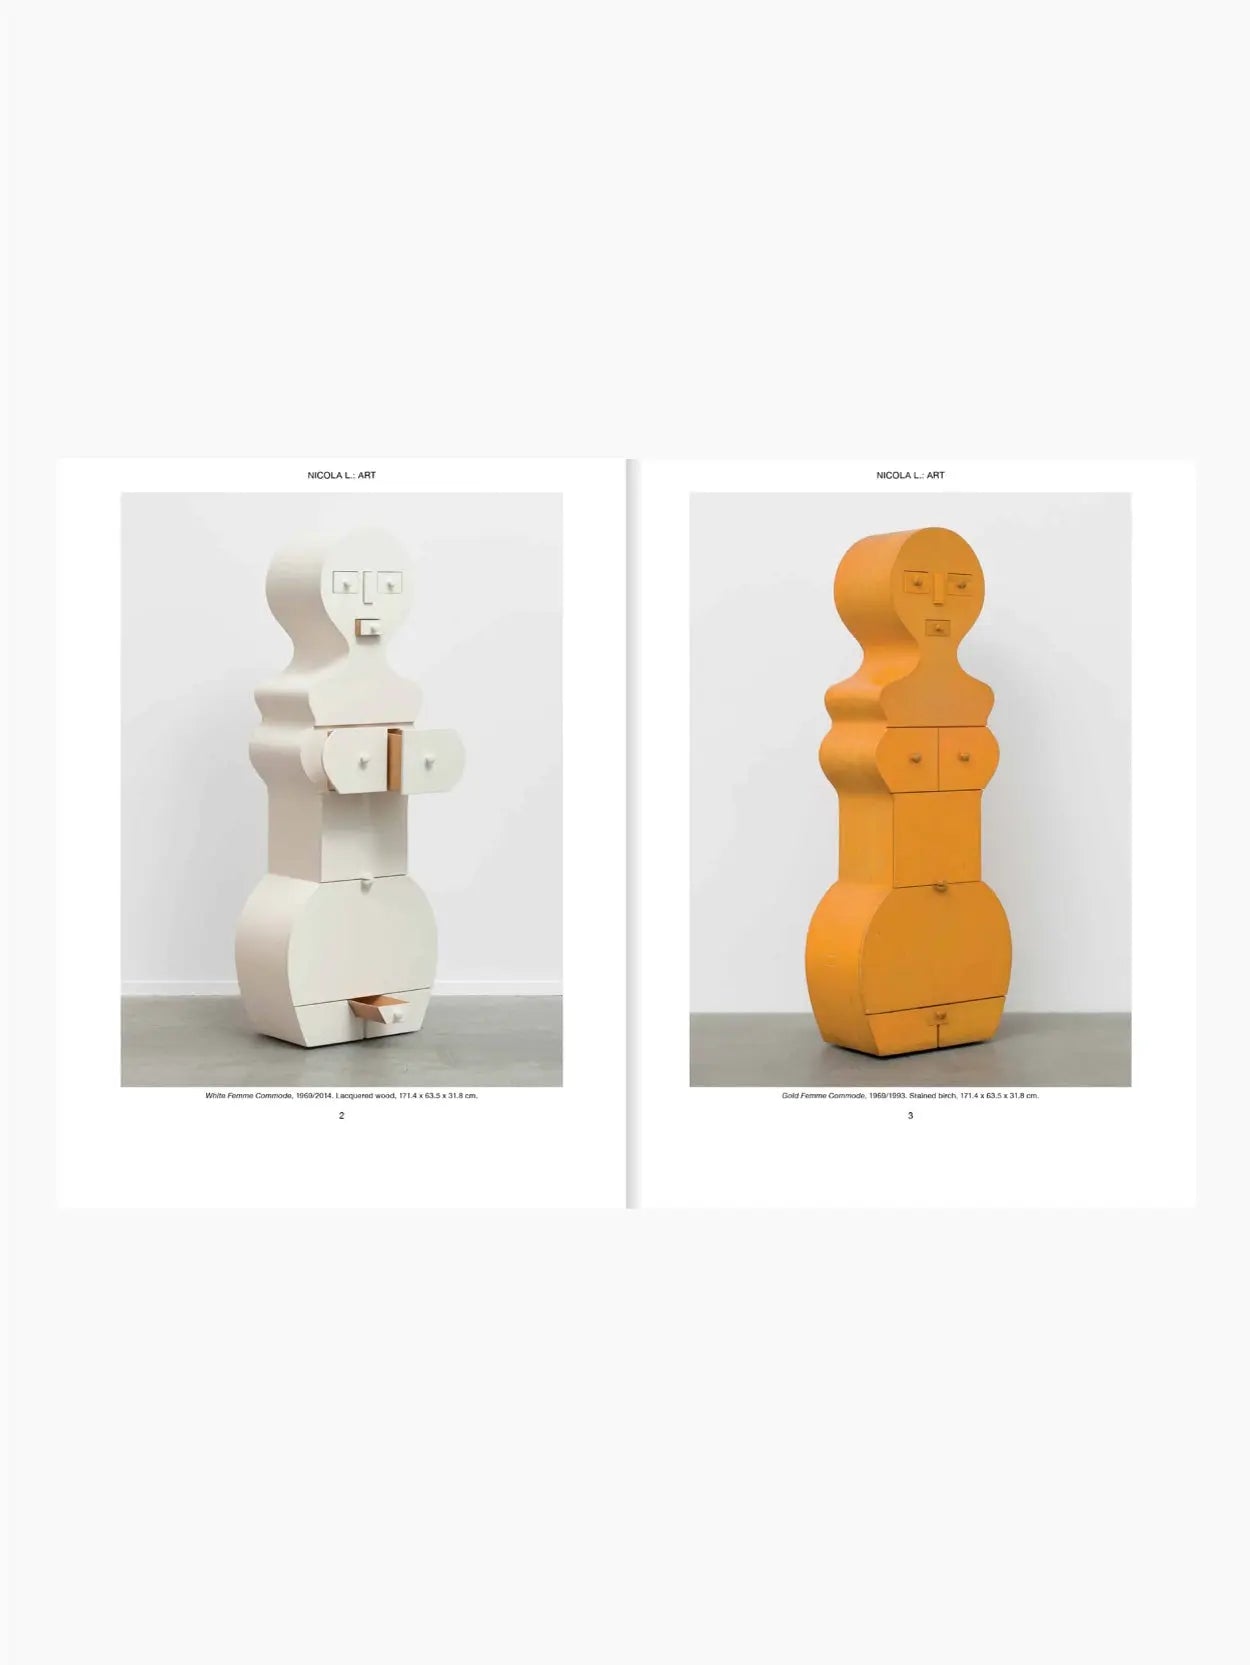 An orange book titled "Nicola L.: Life and Art" features a black and white image of an abstract, humanoid sculpture with a screen displaying a face on its torso. Published by Apartamento in Barcelona, it can be found at BassalStore.